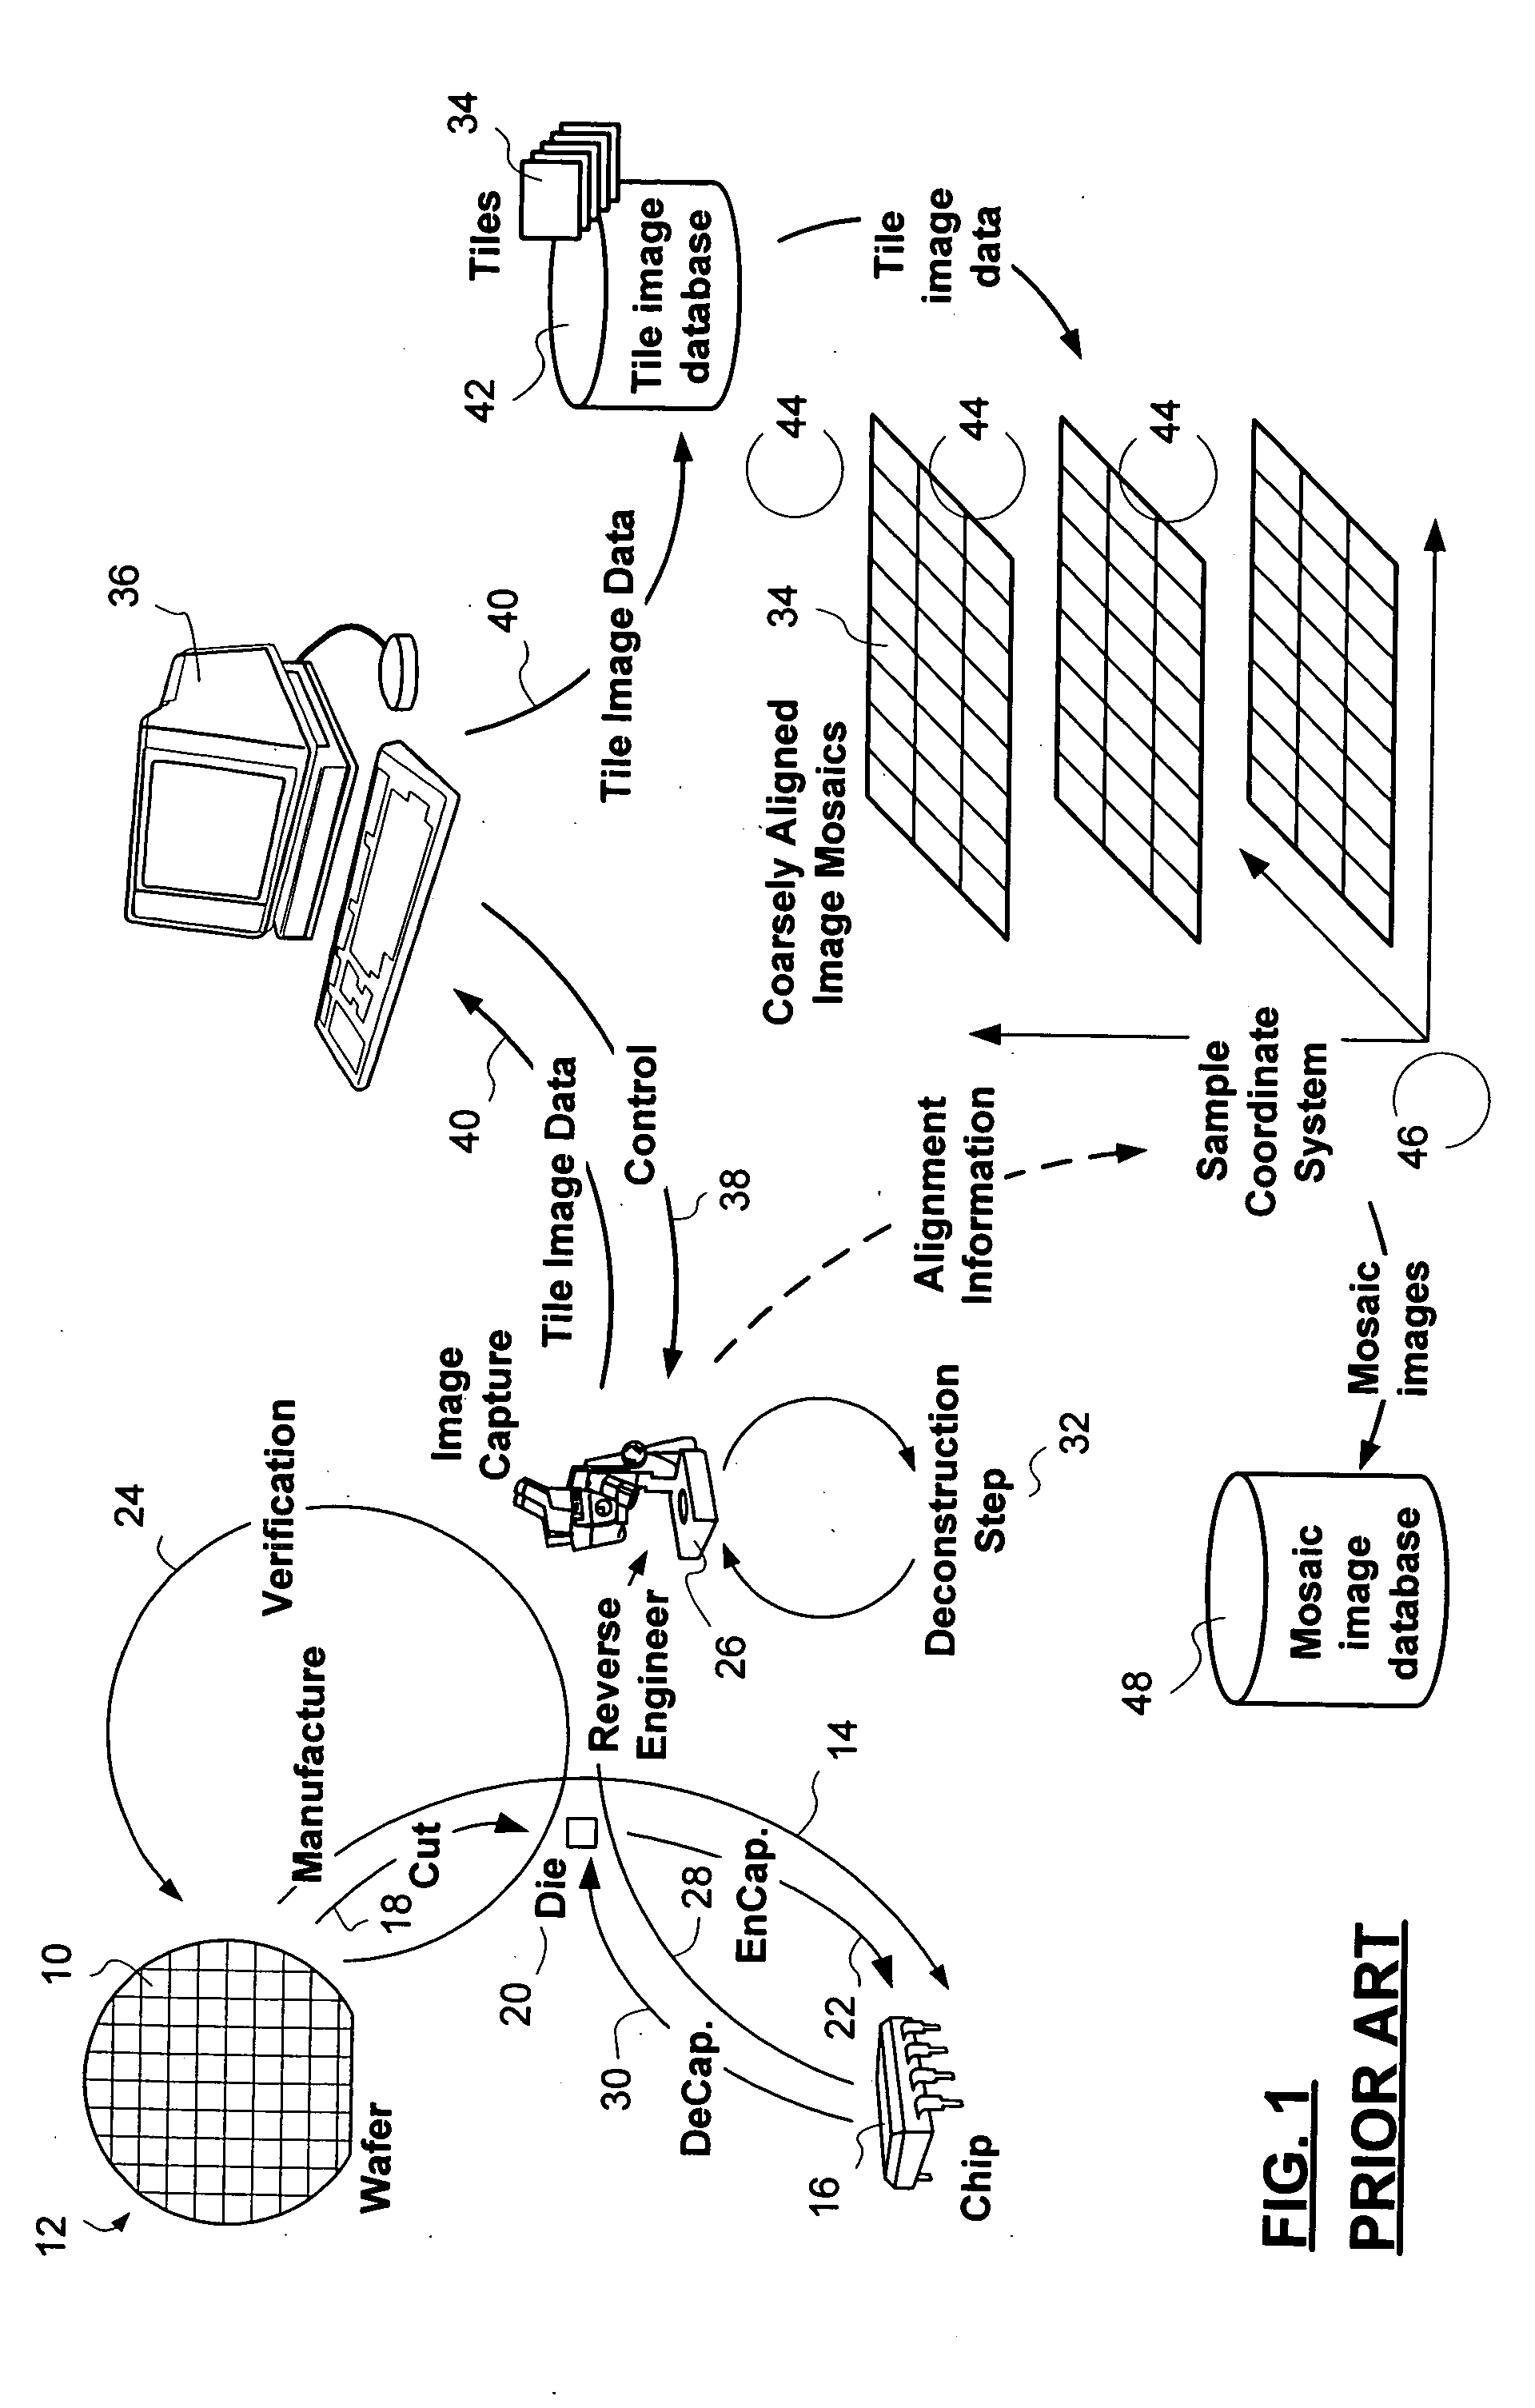 Method and apparatus for producing a 3-D model of a semiconductor chip from mosaic images